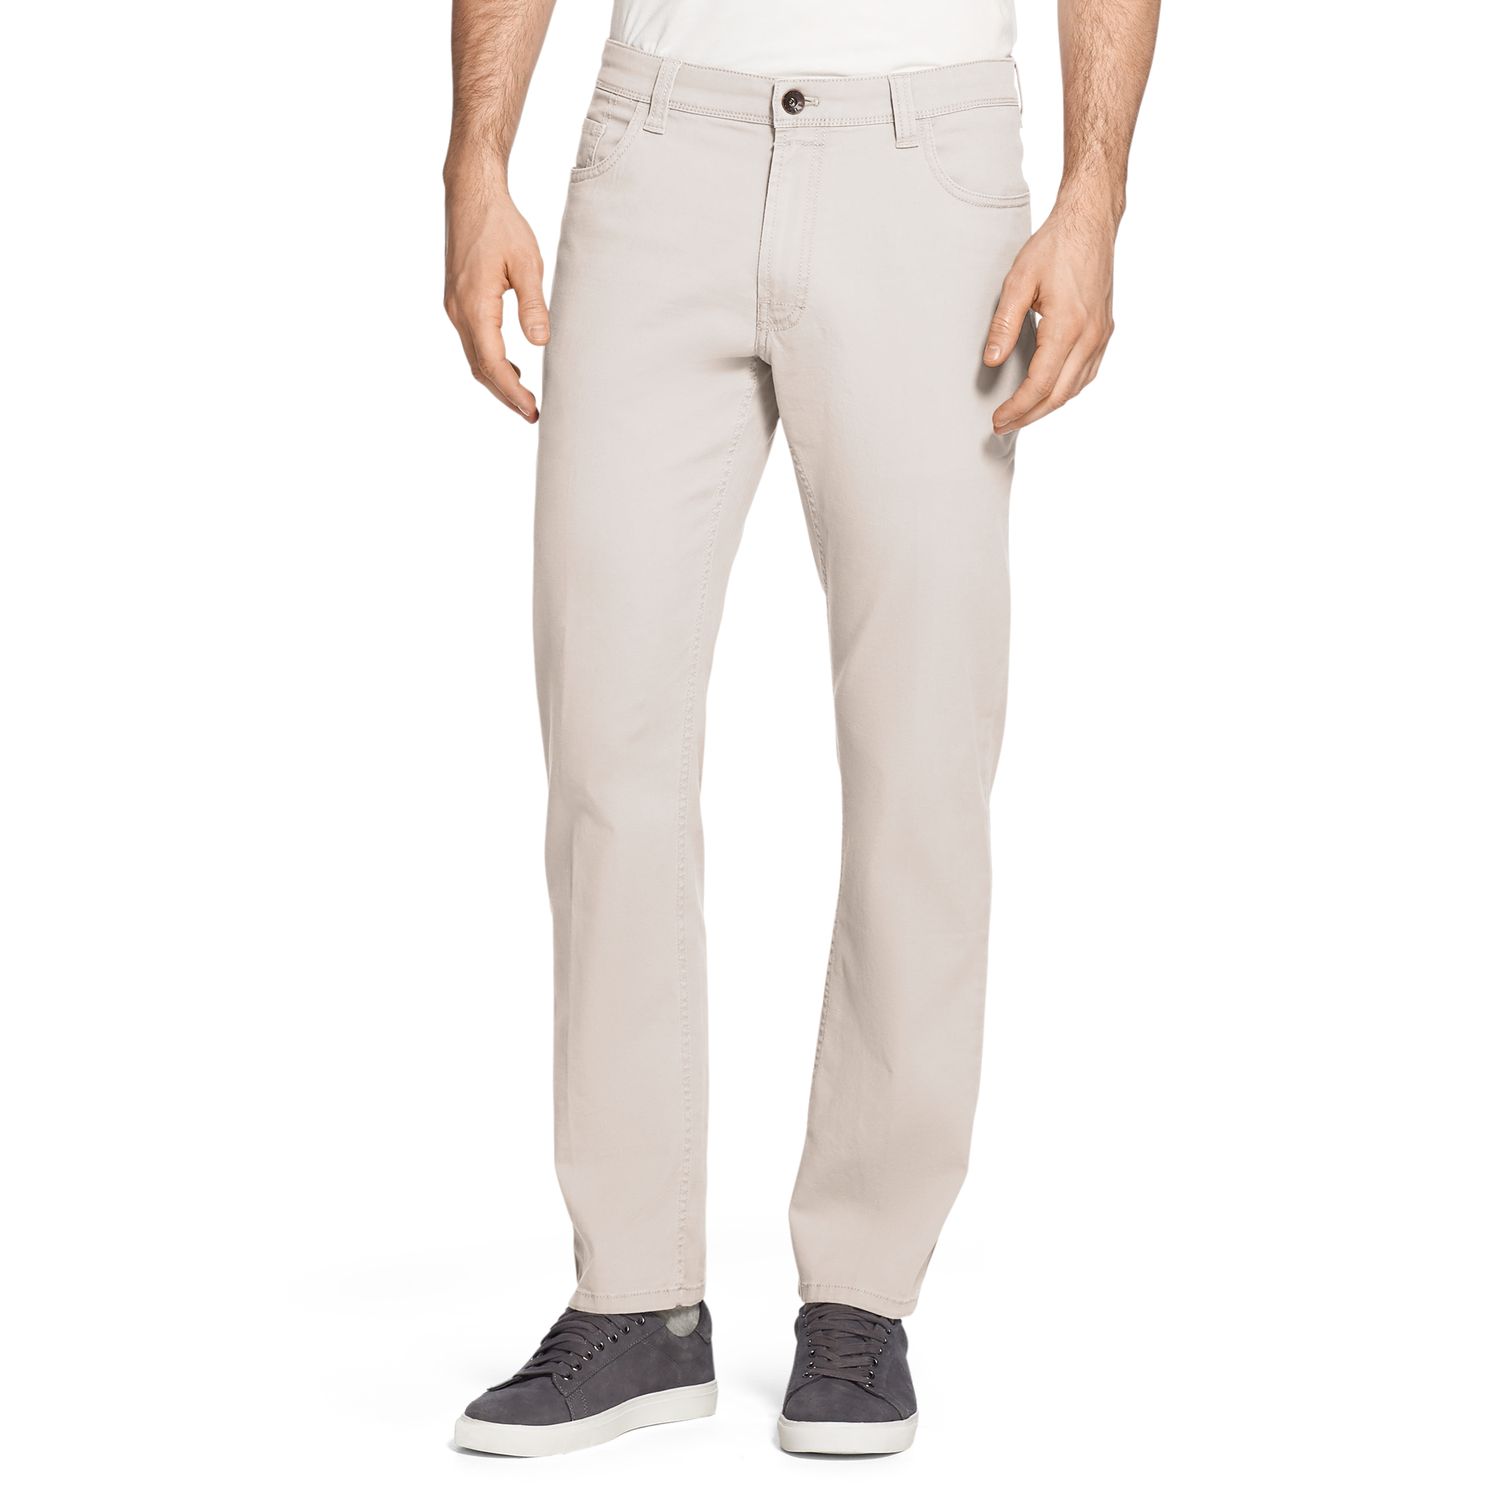 izod relaxed fit comfort stretch